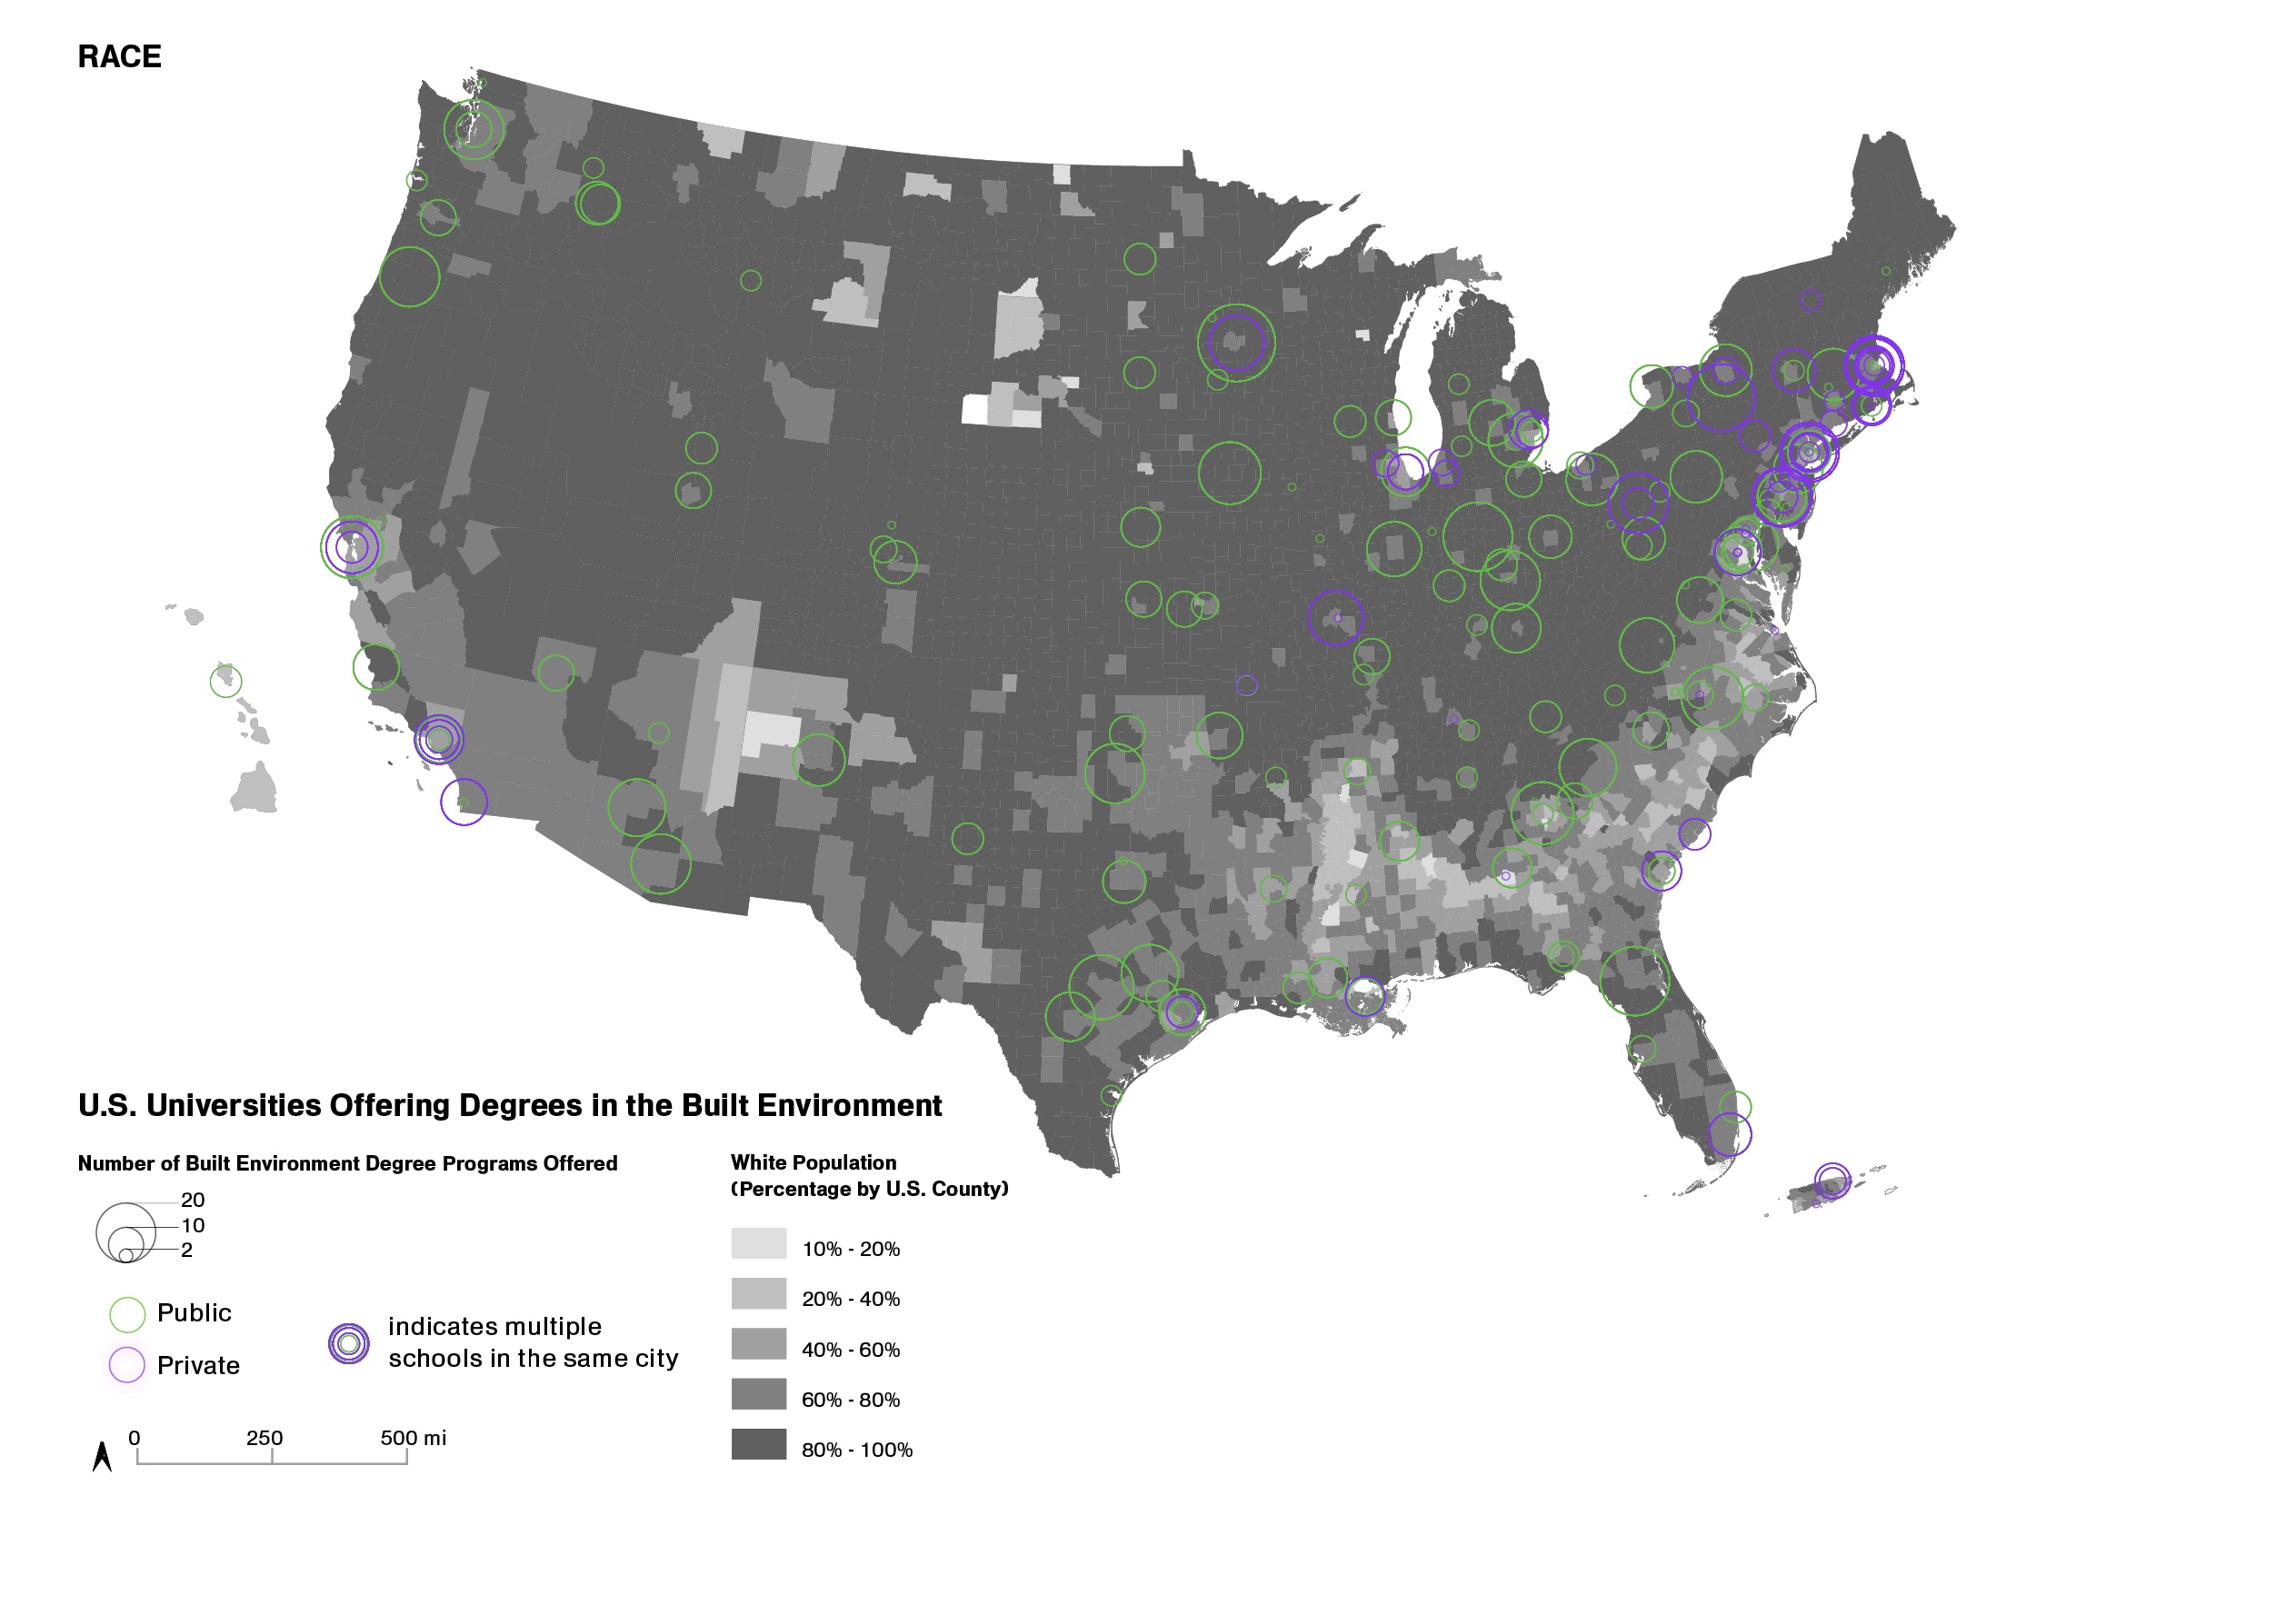 Map of the United States overalid with White Population (Percentage by US County) and Number of Built Environment Degree Programs Offered